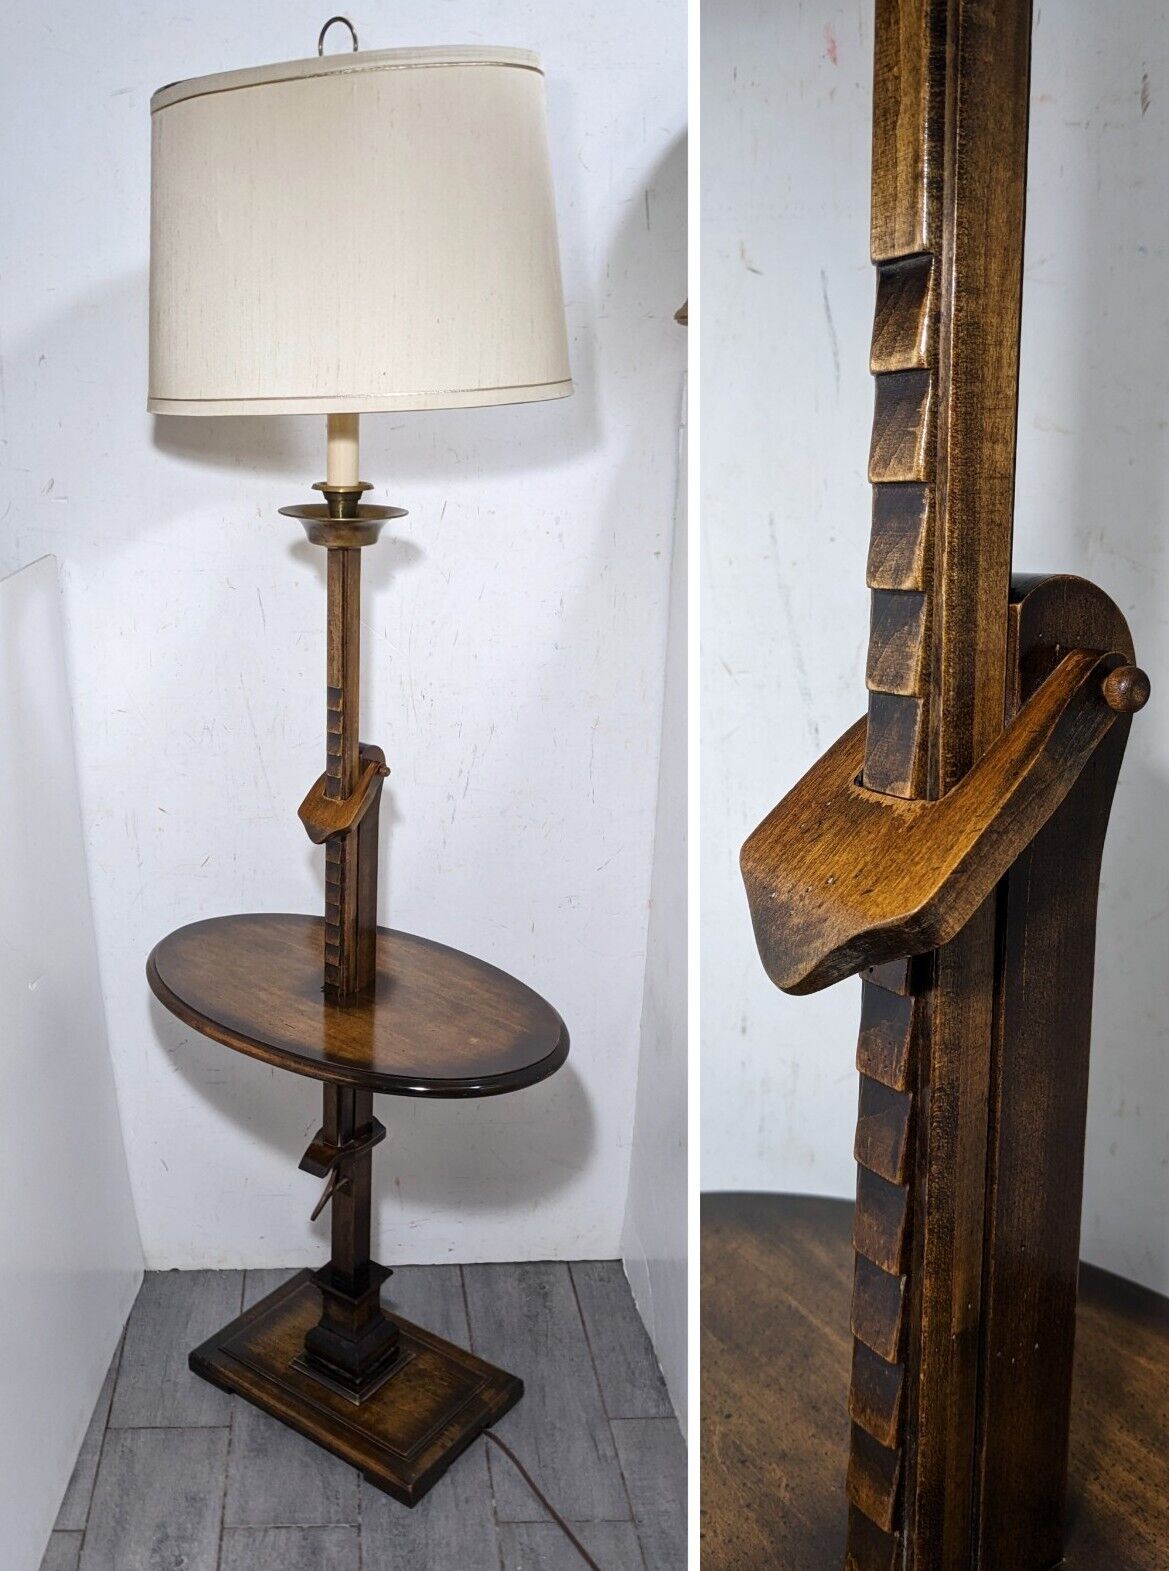 Vintage Frederick Cooper Adjustable Ratchet Walnut Floor Lamp with Tray Table